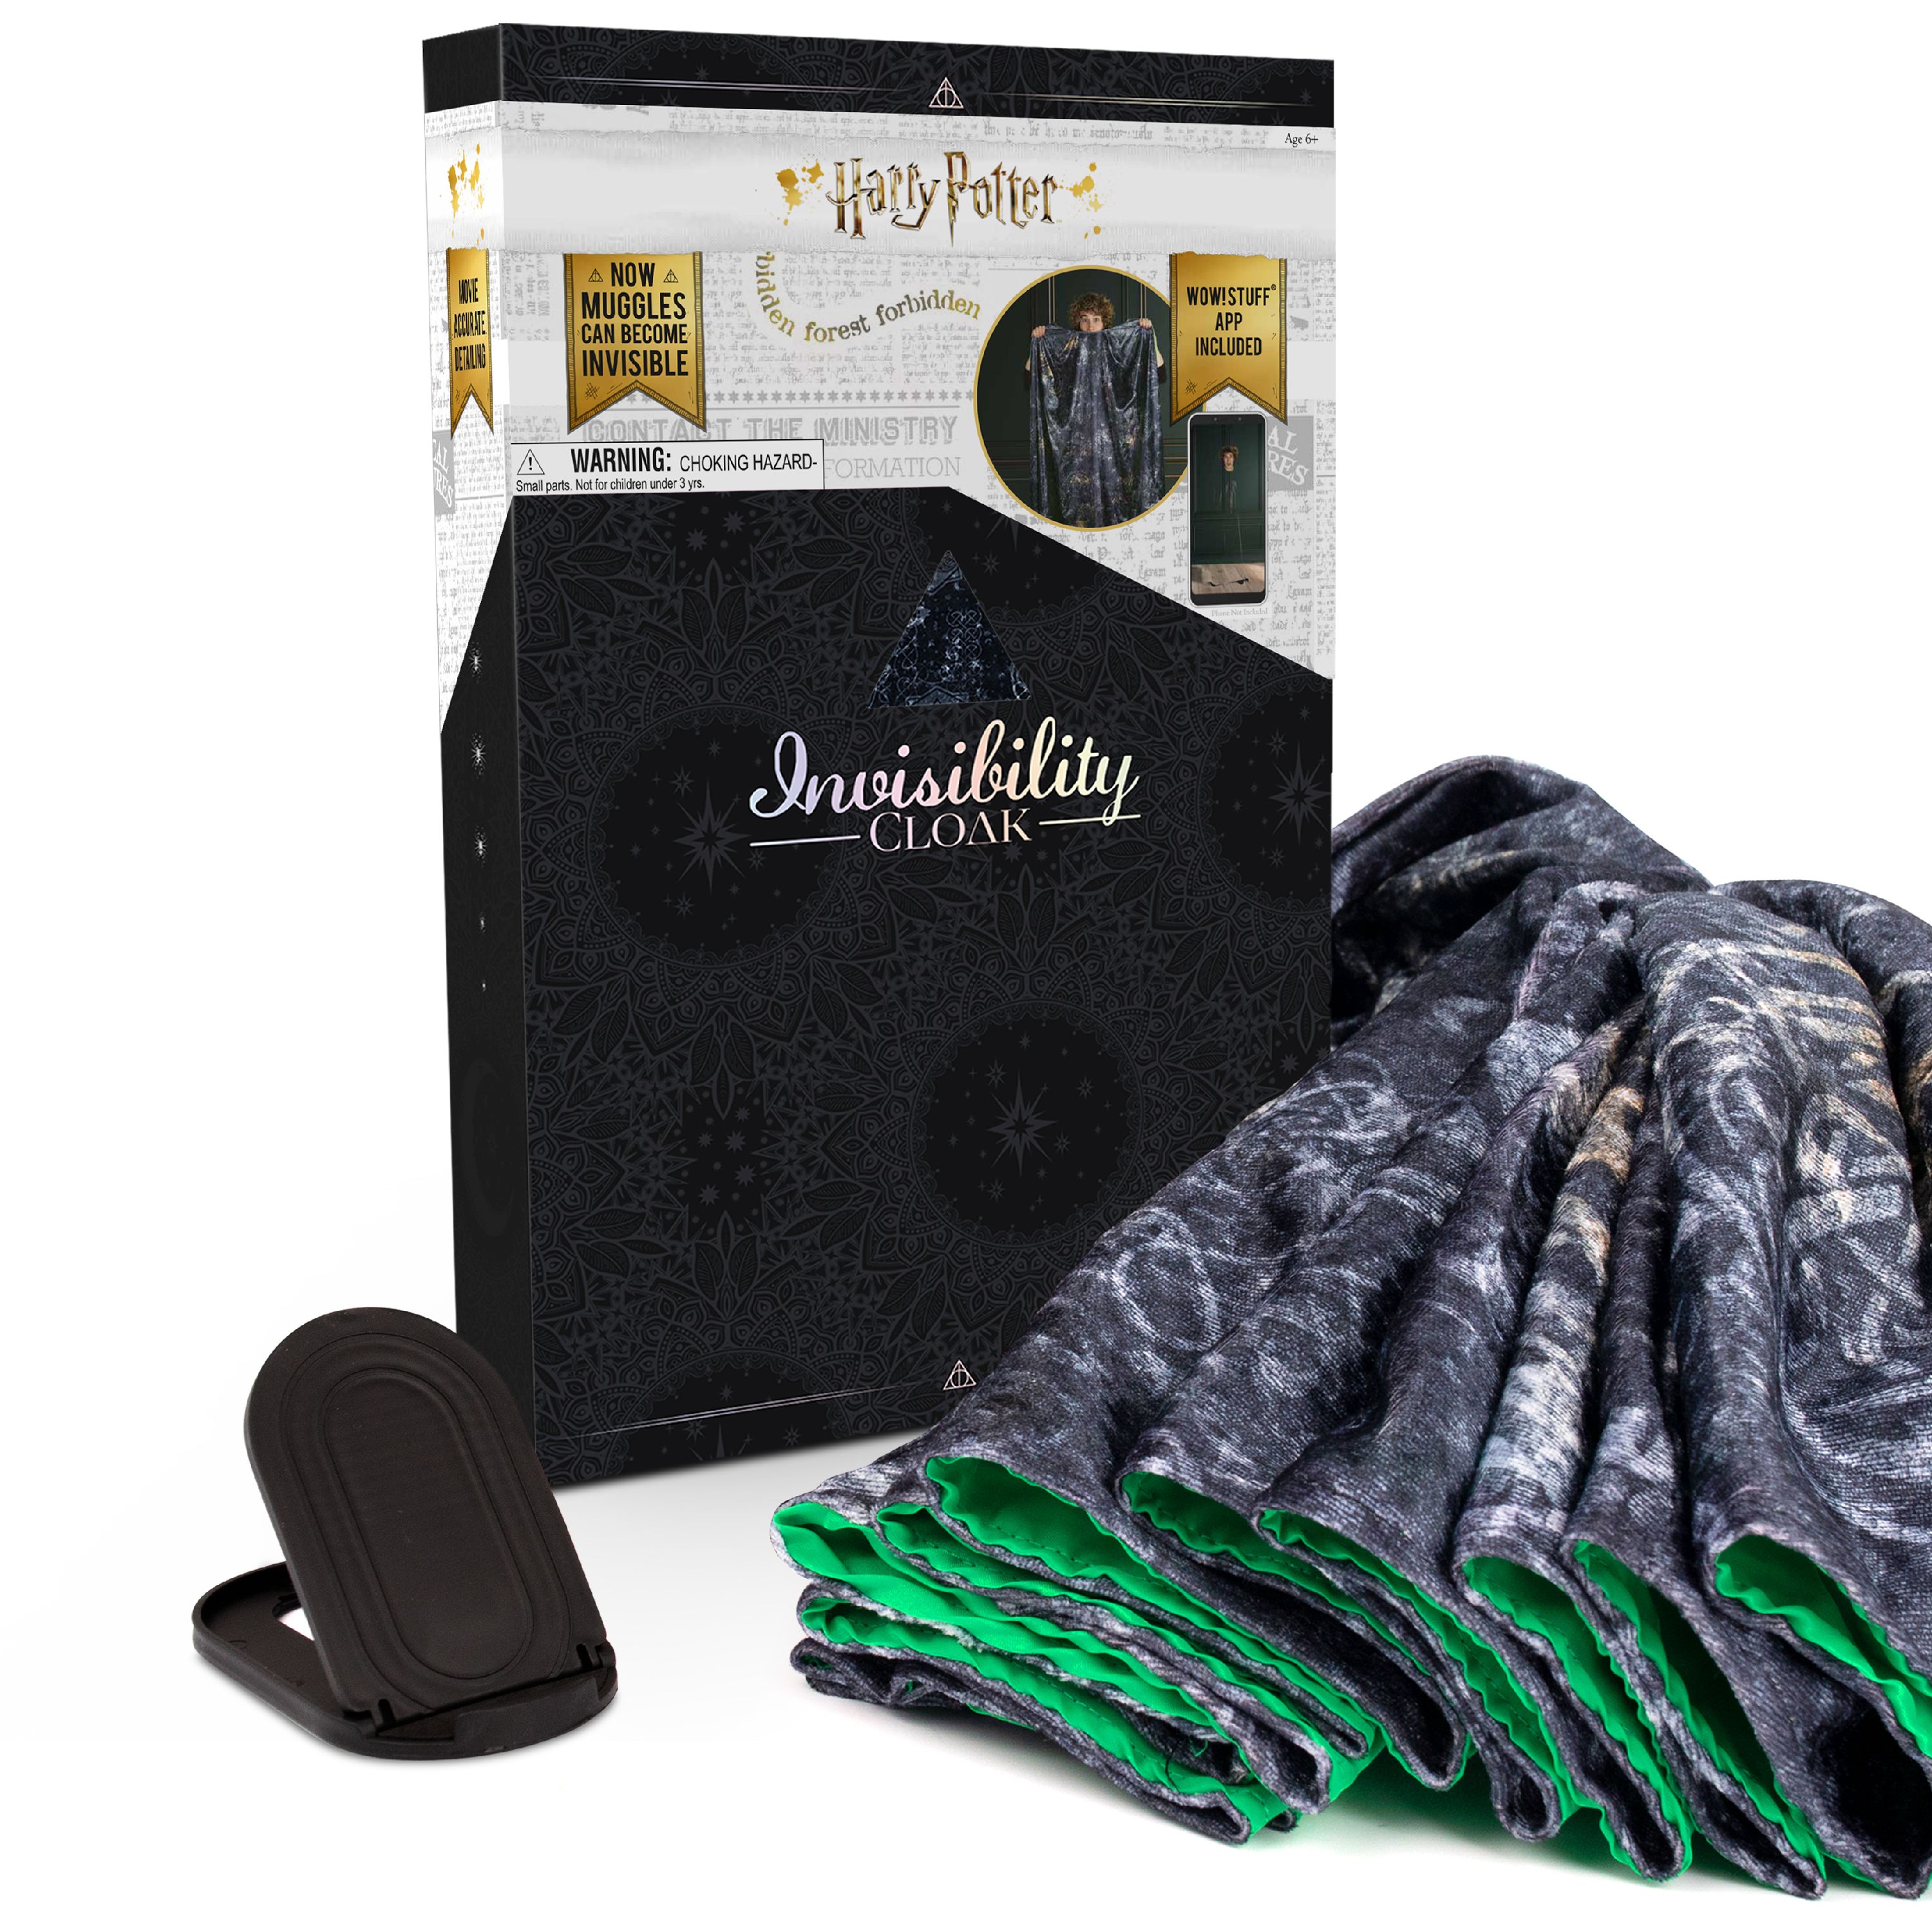 Harry Potter Invisibility Cloak with Exclusive Gift Box Package - image 4 of 11